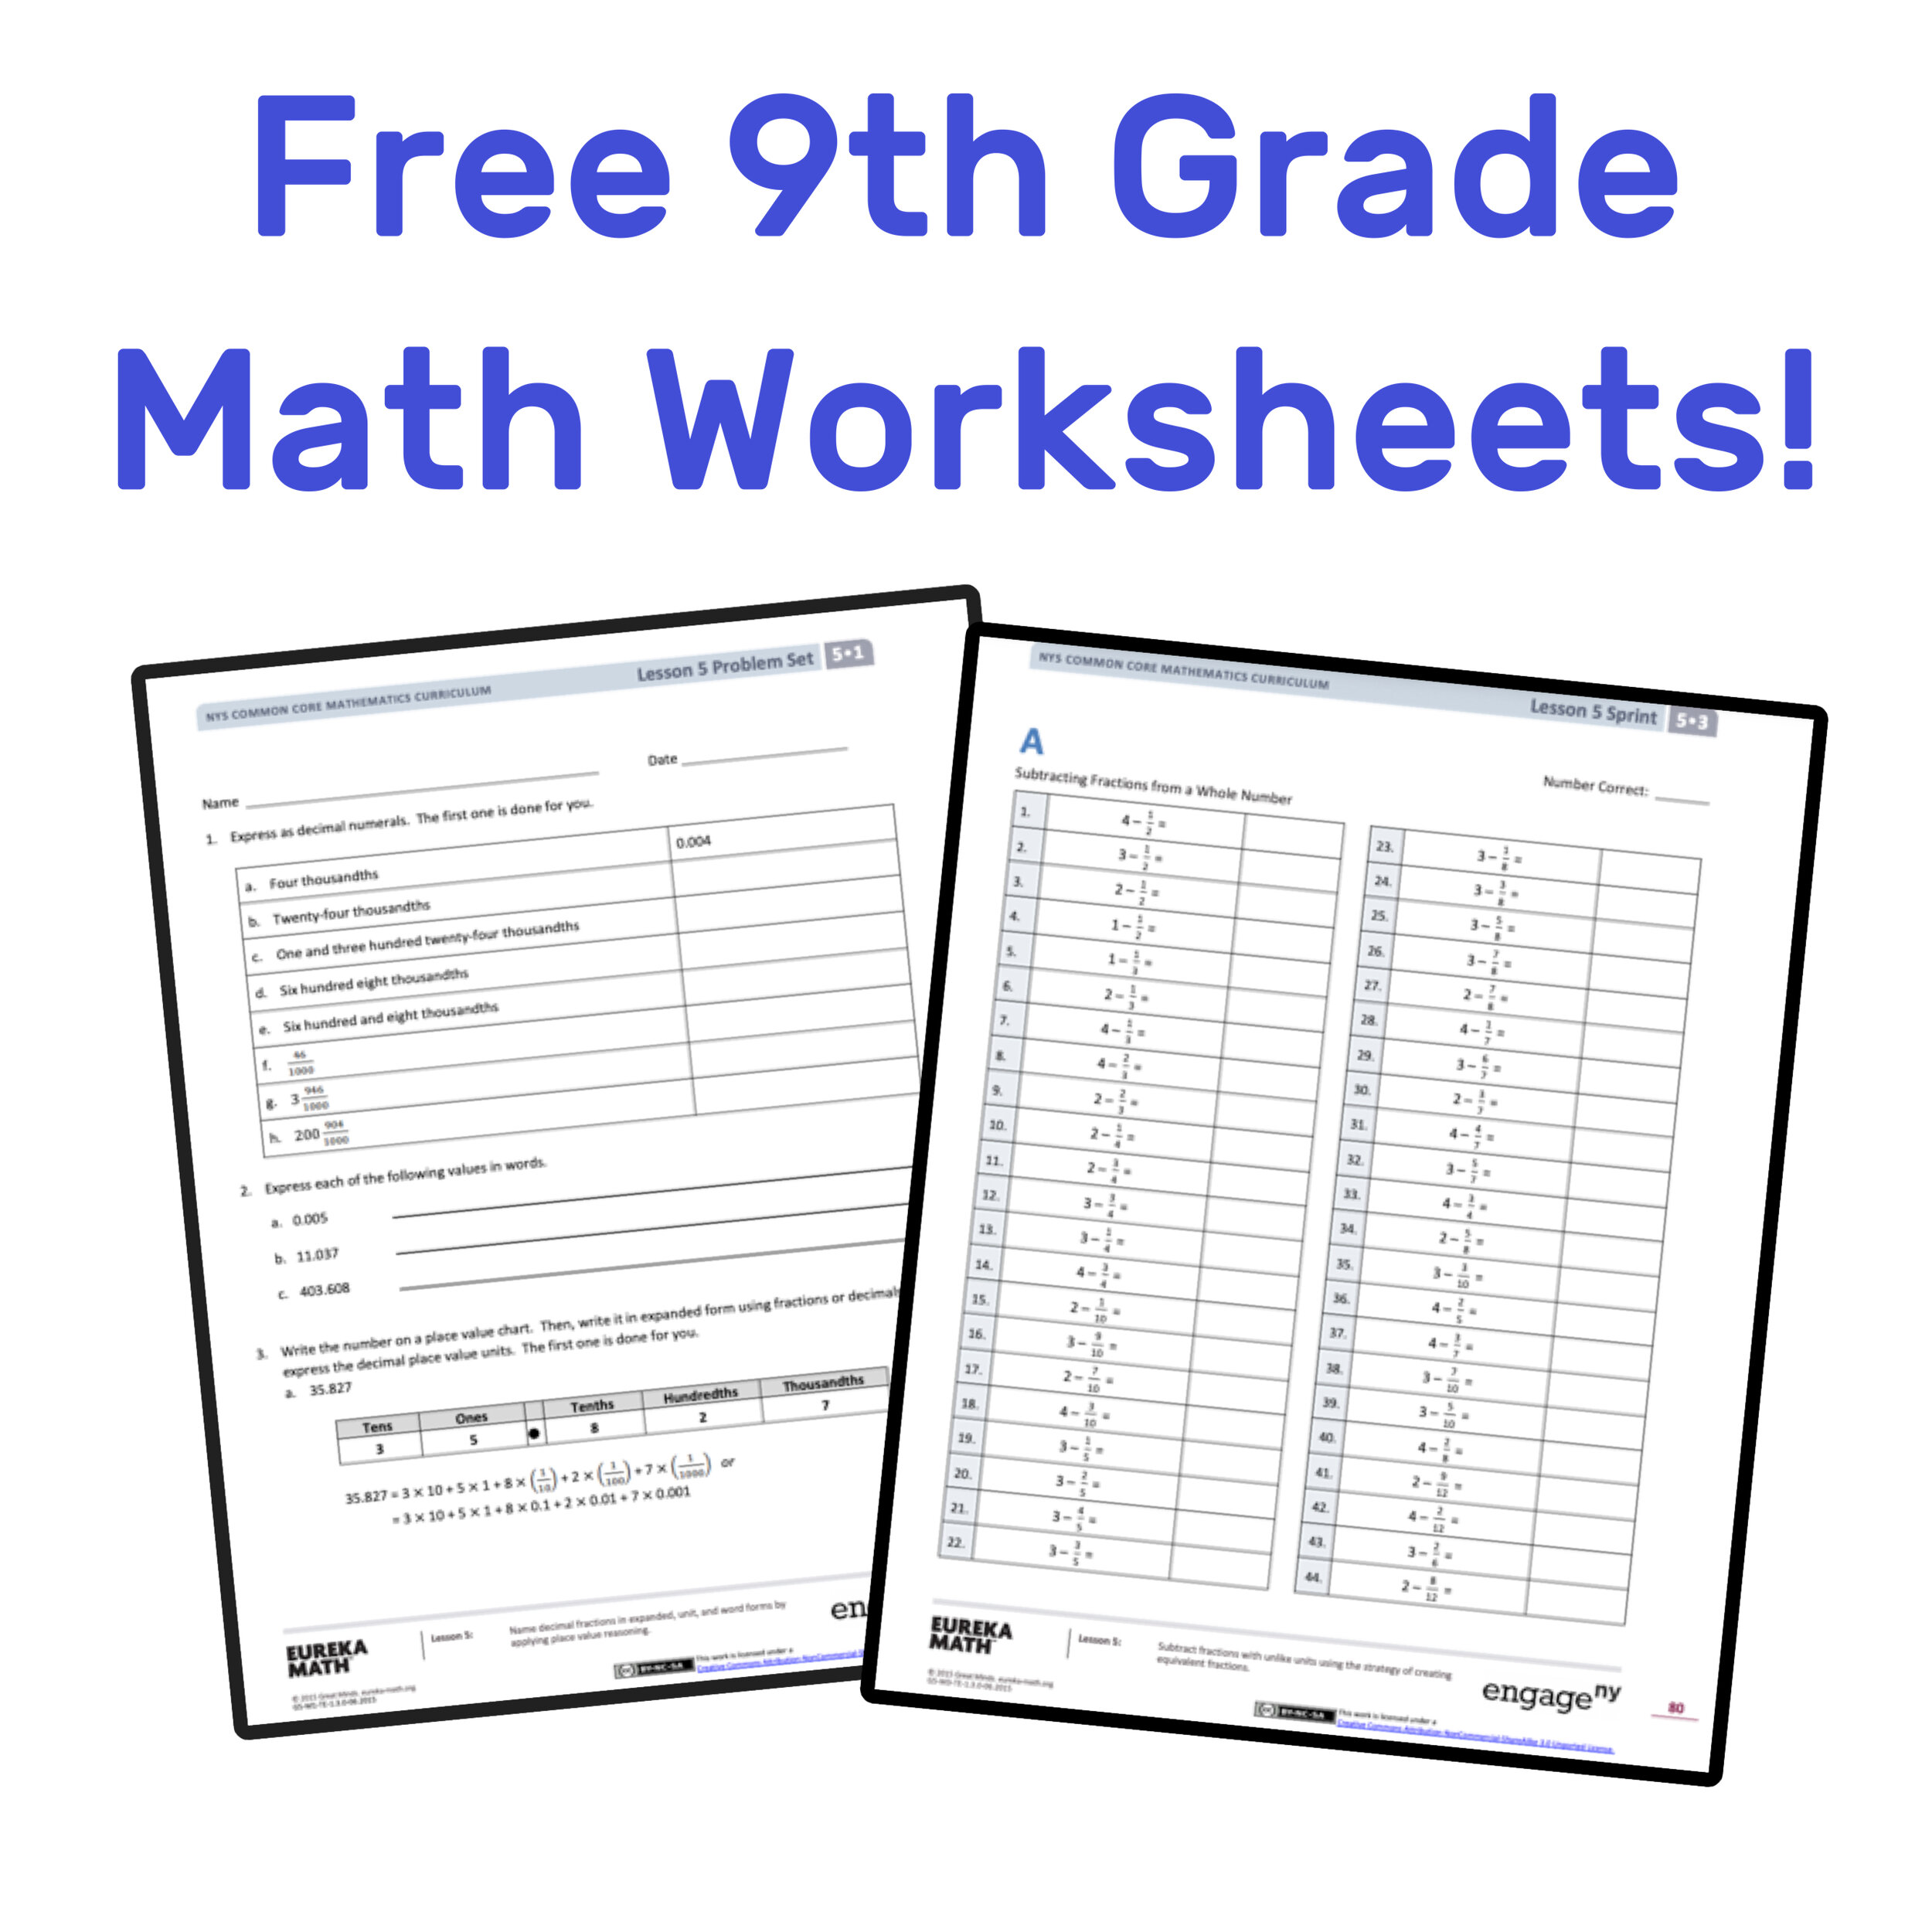 The Best Free 9th Grade Math Resources Complete List Mashup Math